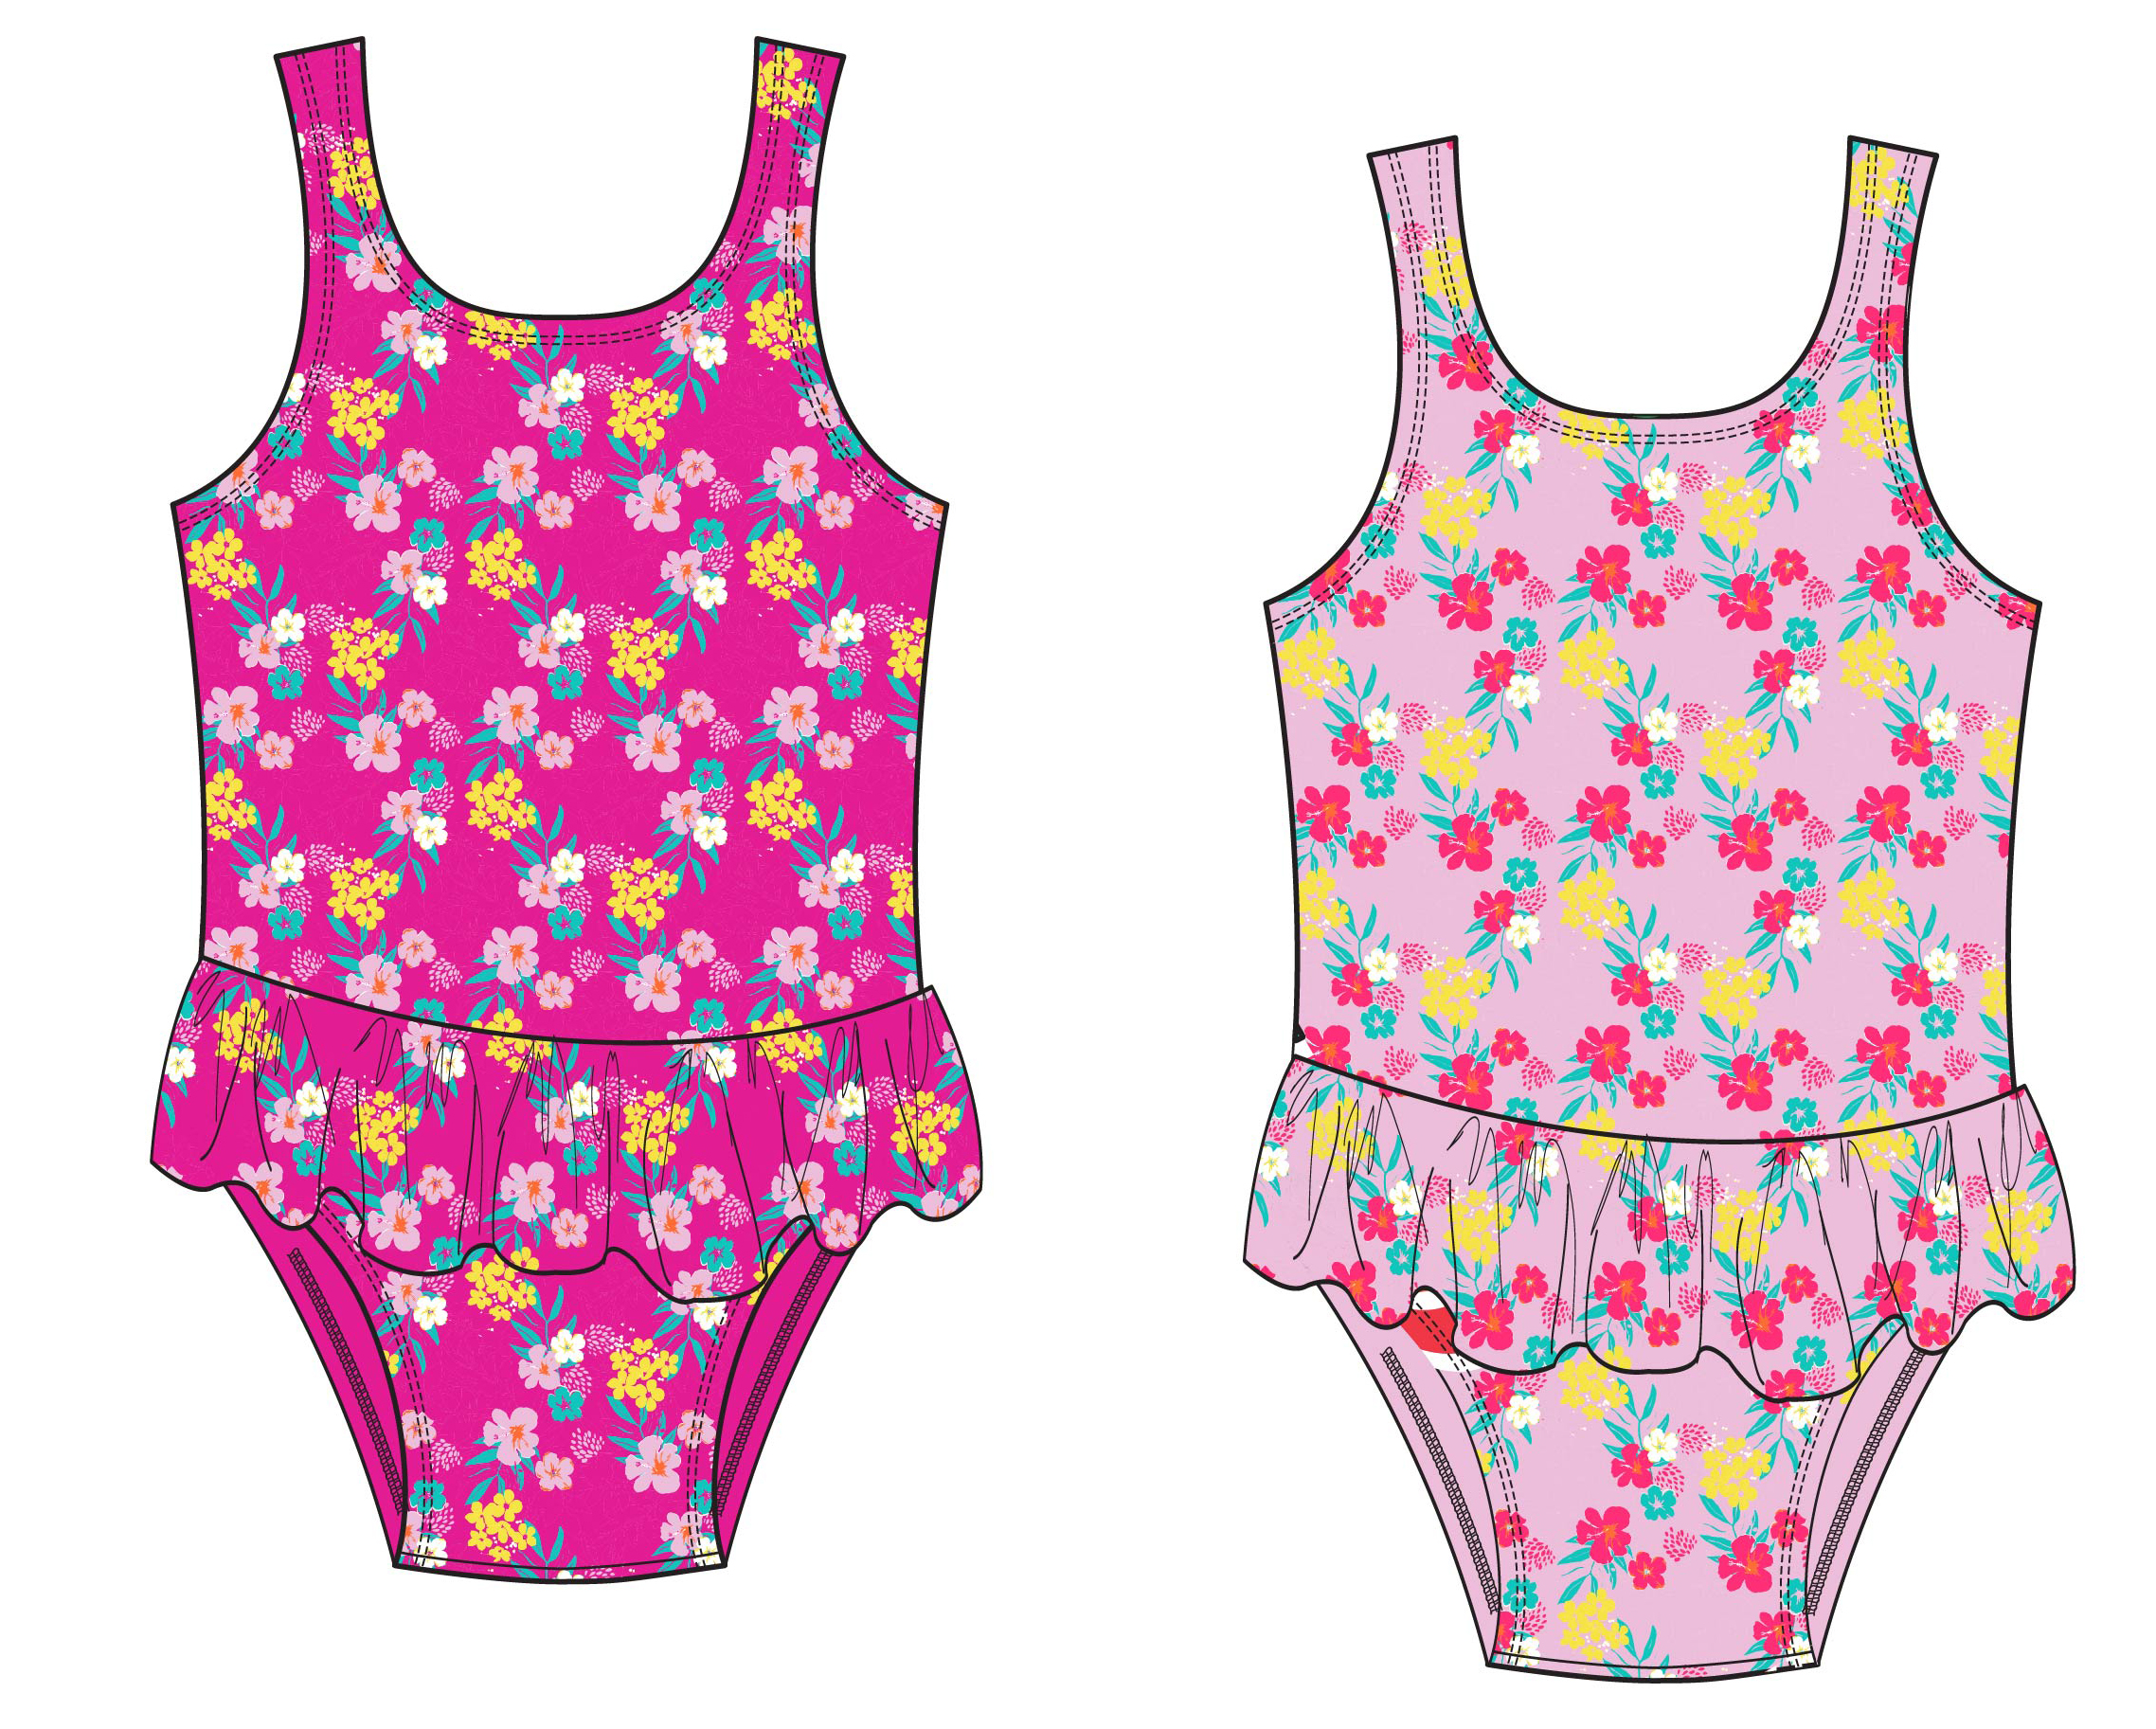 Toddler Girl's One-Piece Printed Swimsuits w/ Ruffle SKIRT - Hibiscus Floral Print - Sizes 2T-4T